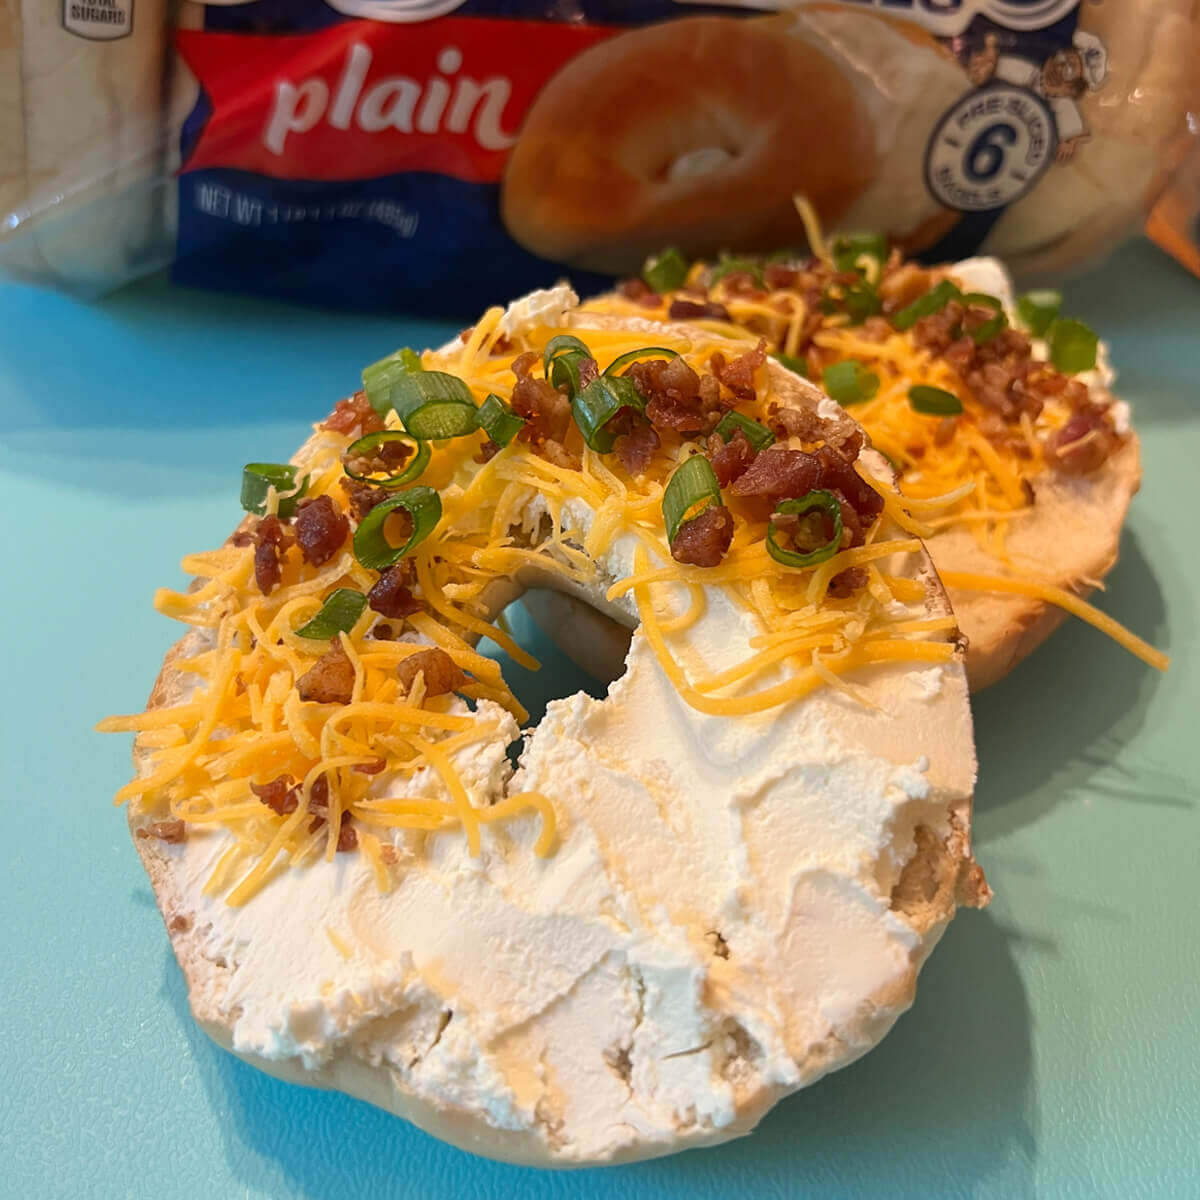 Bacon Cheddar and Chive topped bagel